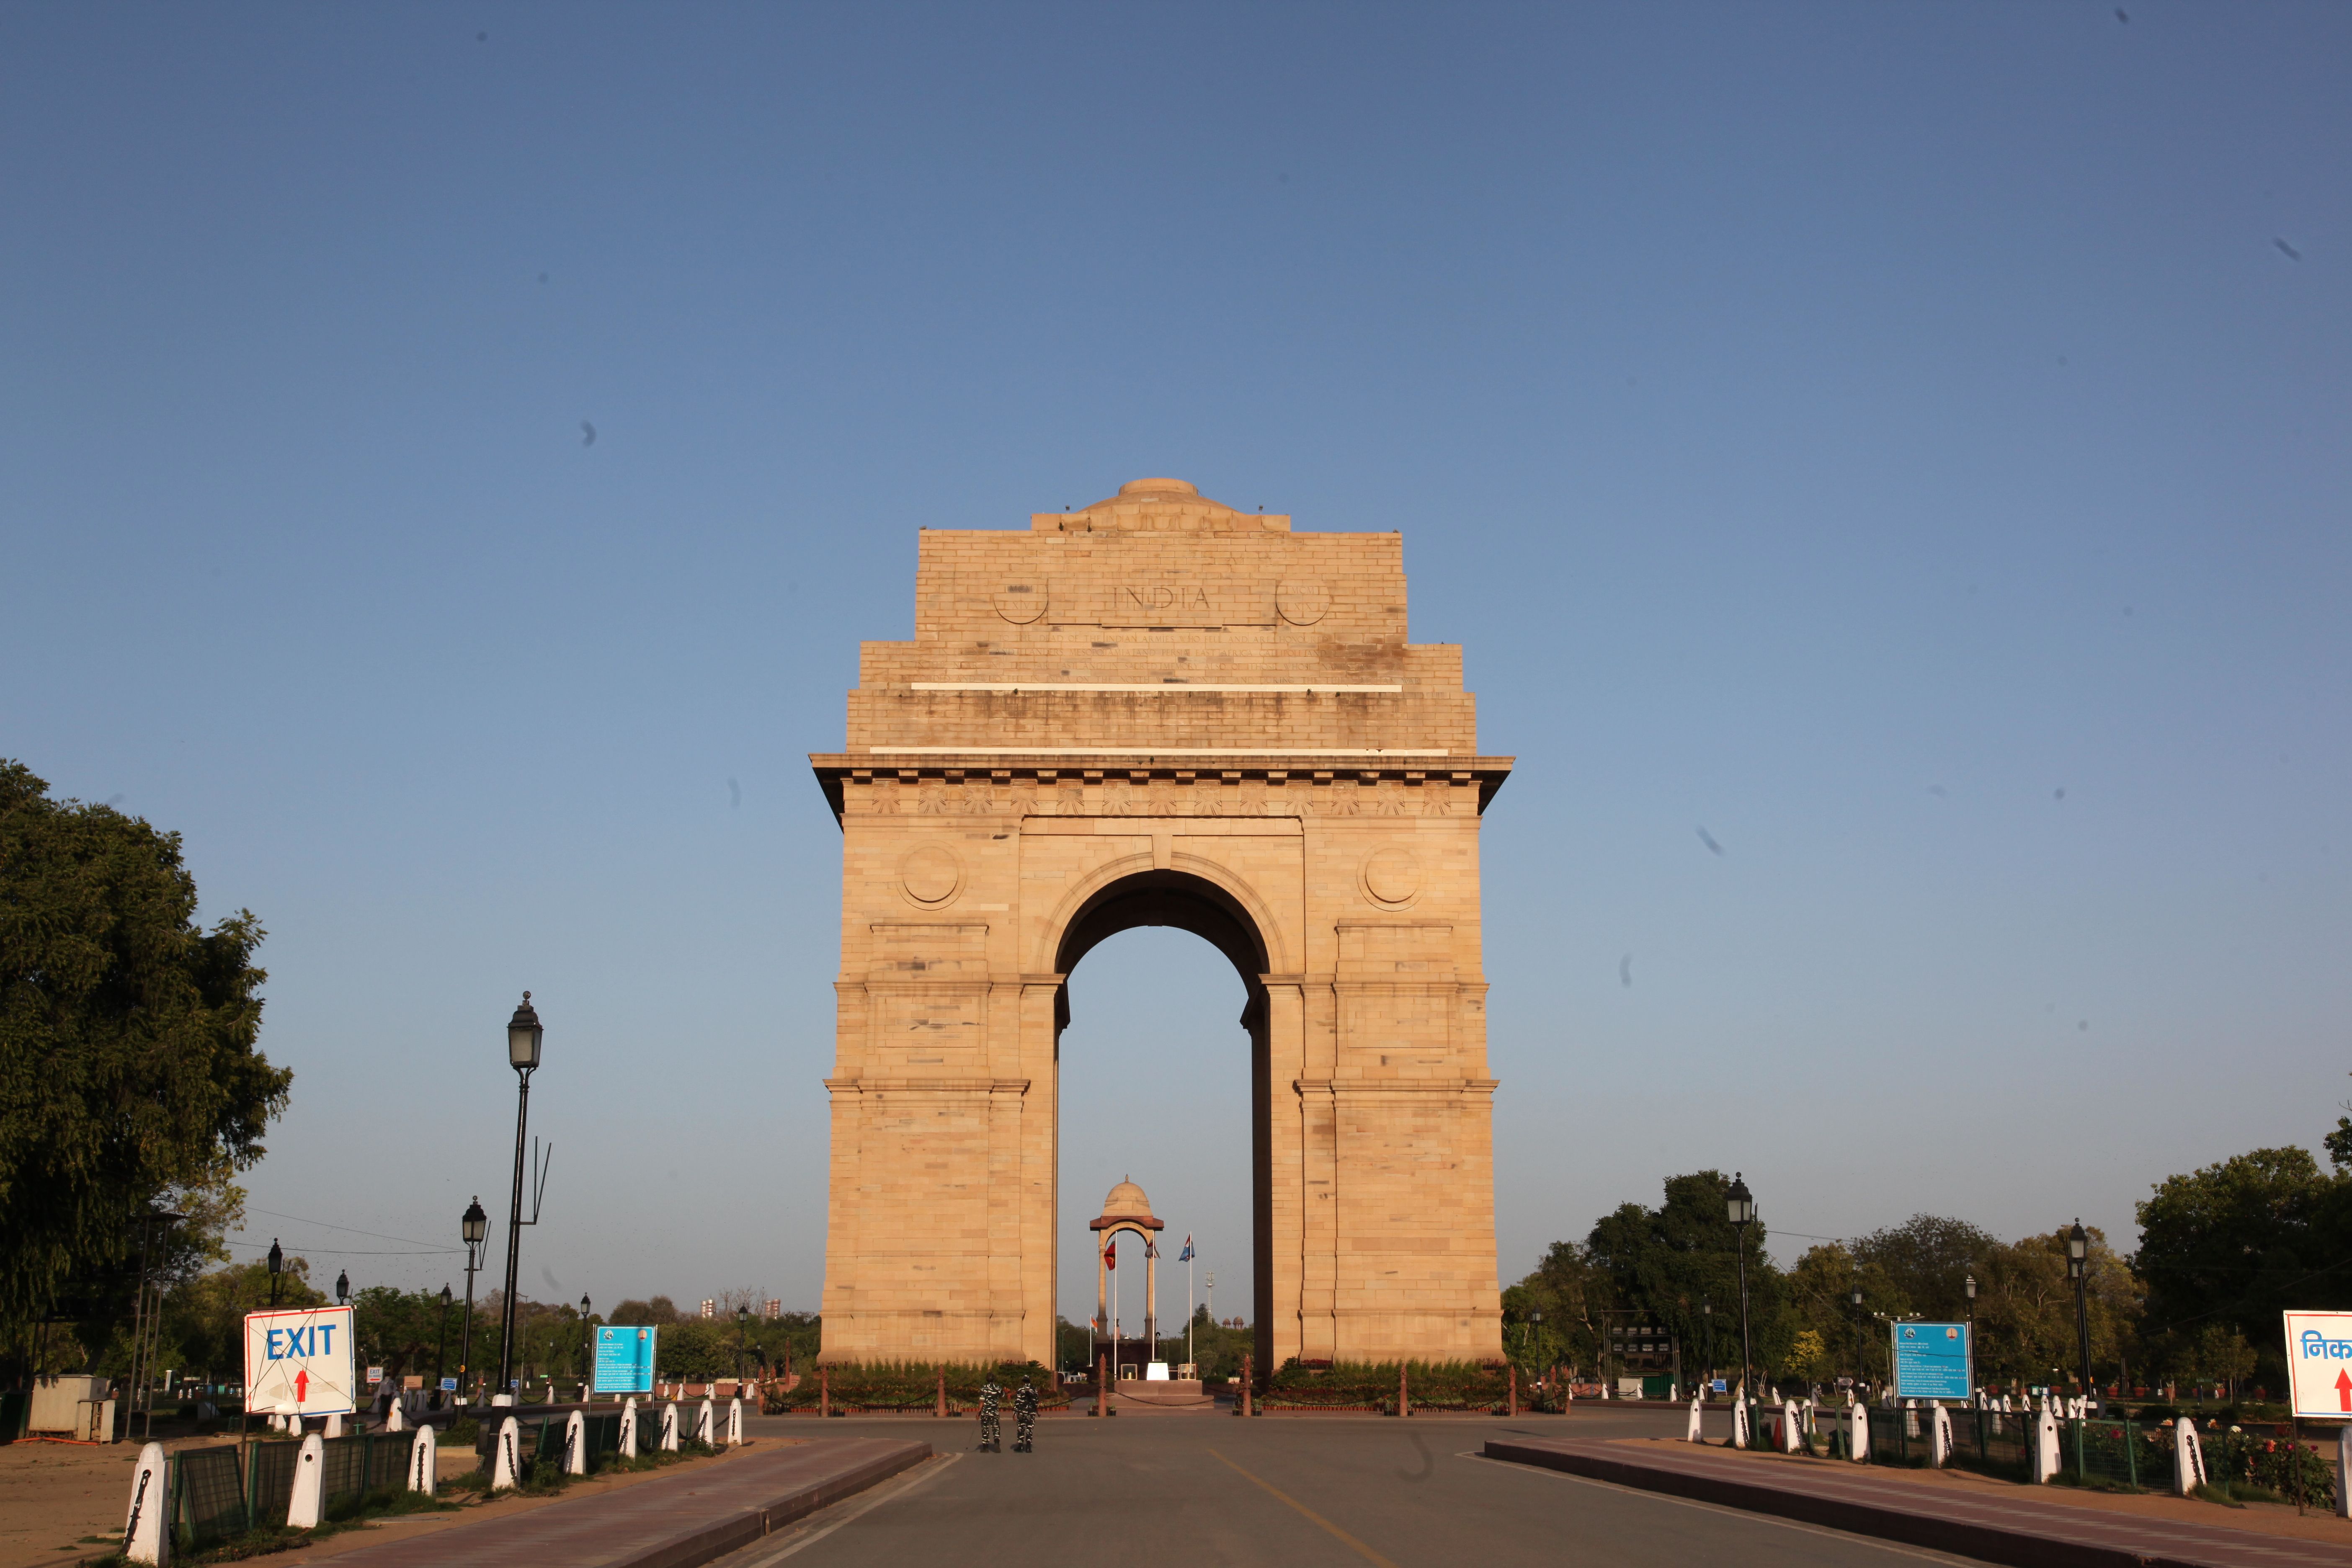 The India Gate surrounded by blue skies